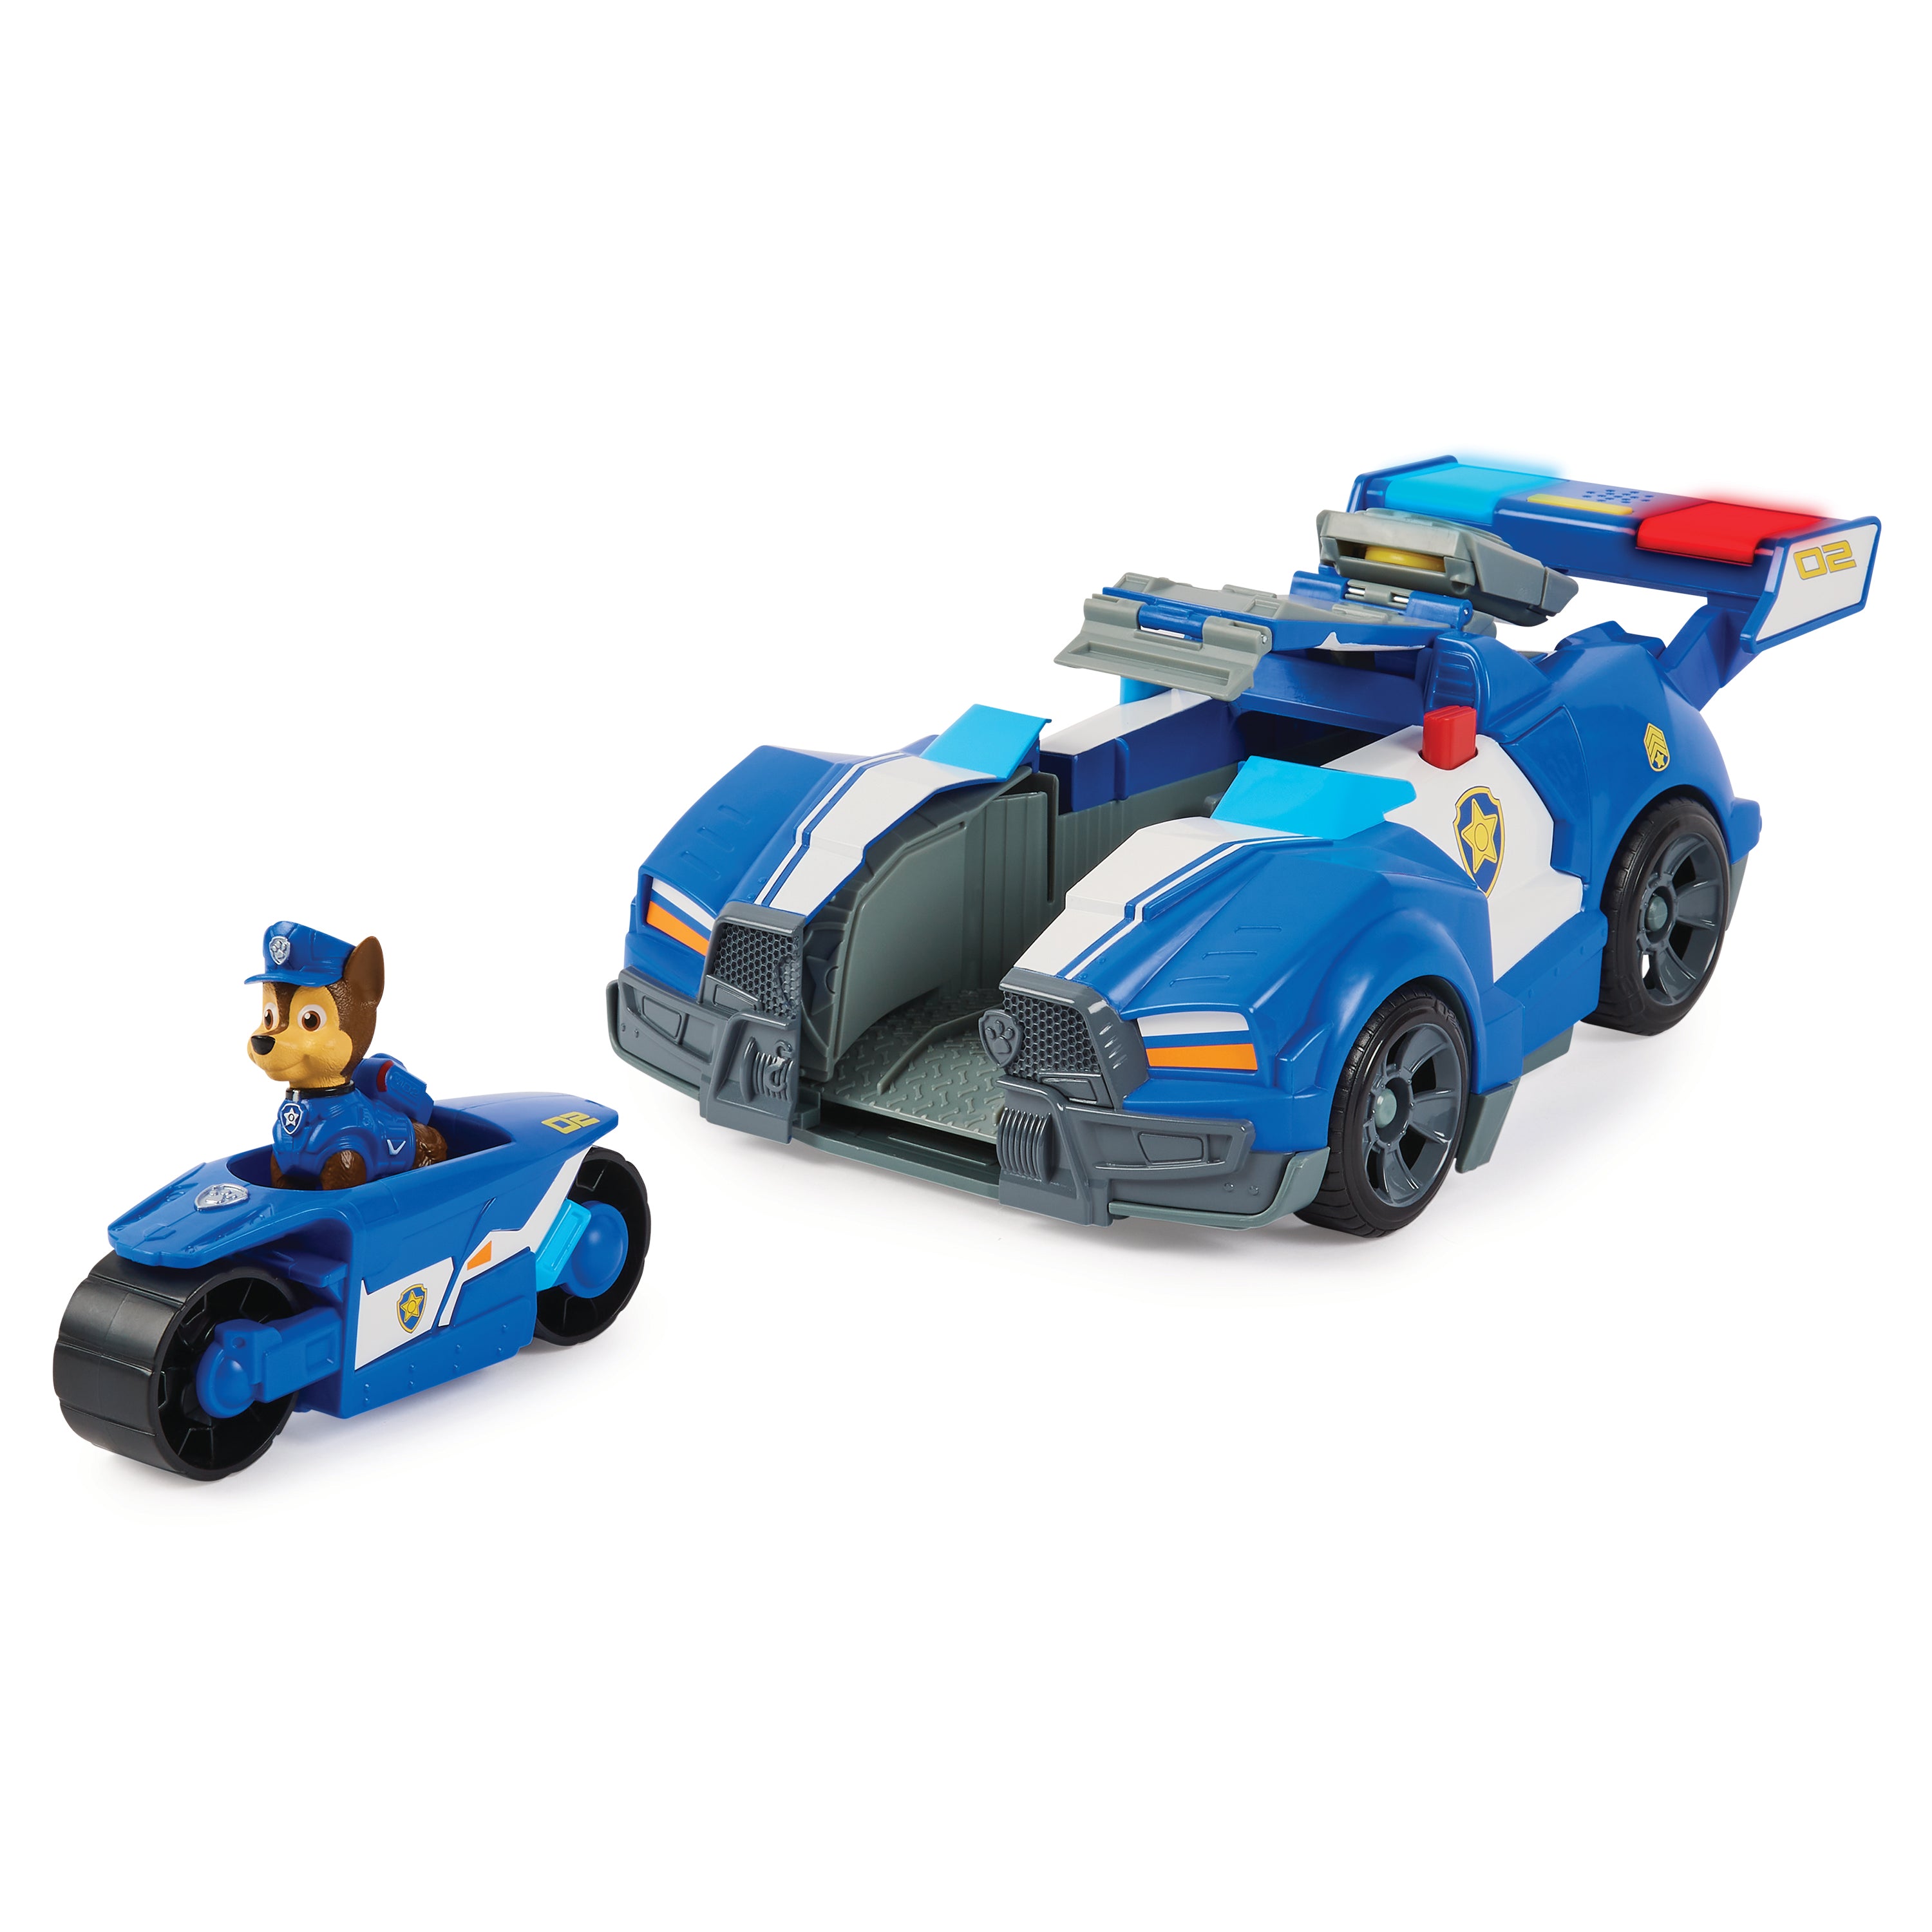 Paw Patrol: Paw Patrol La Pelicula Vehiculo Transformable - Chase